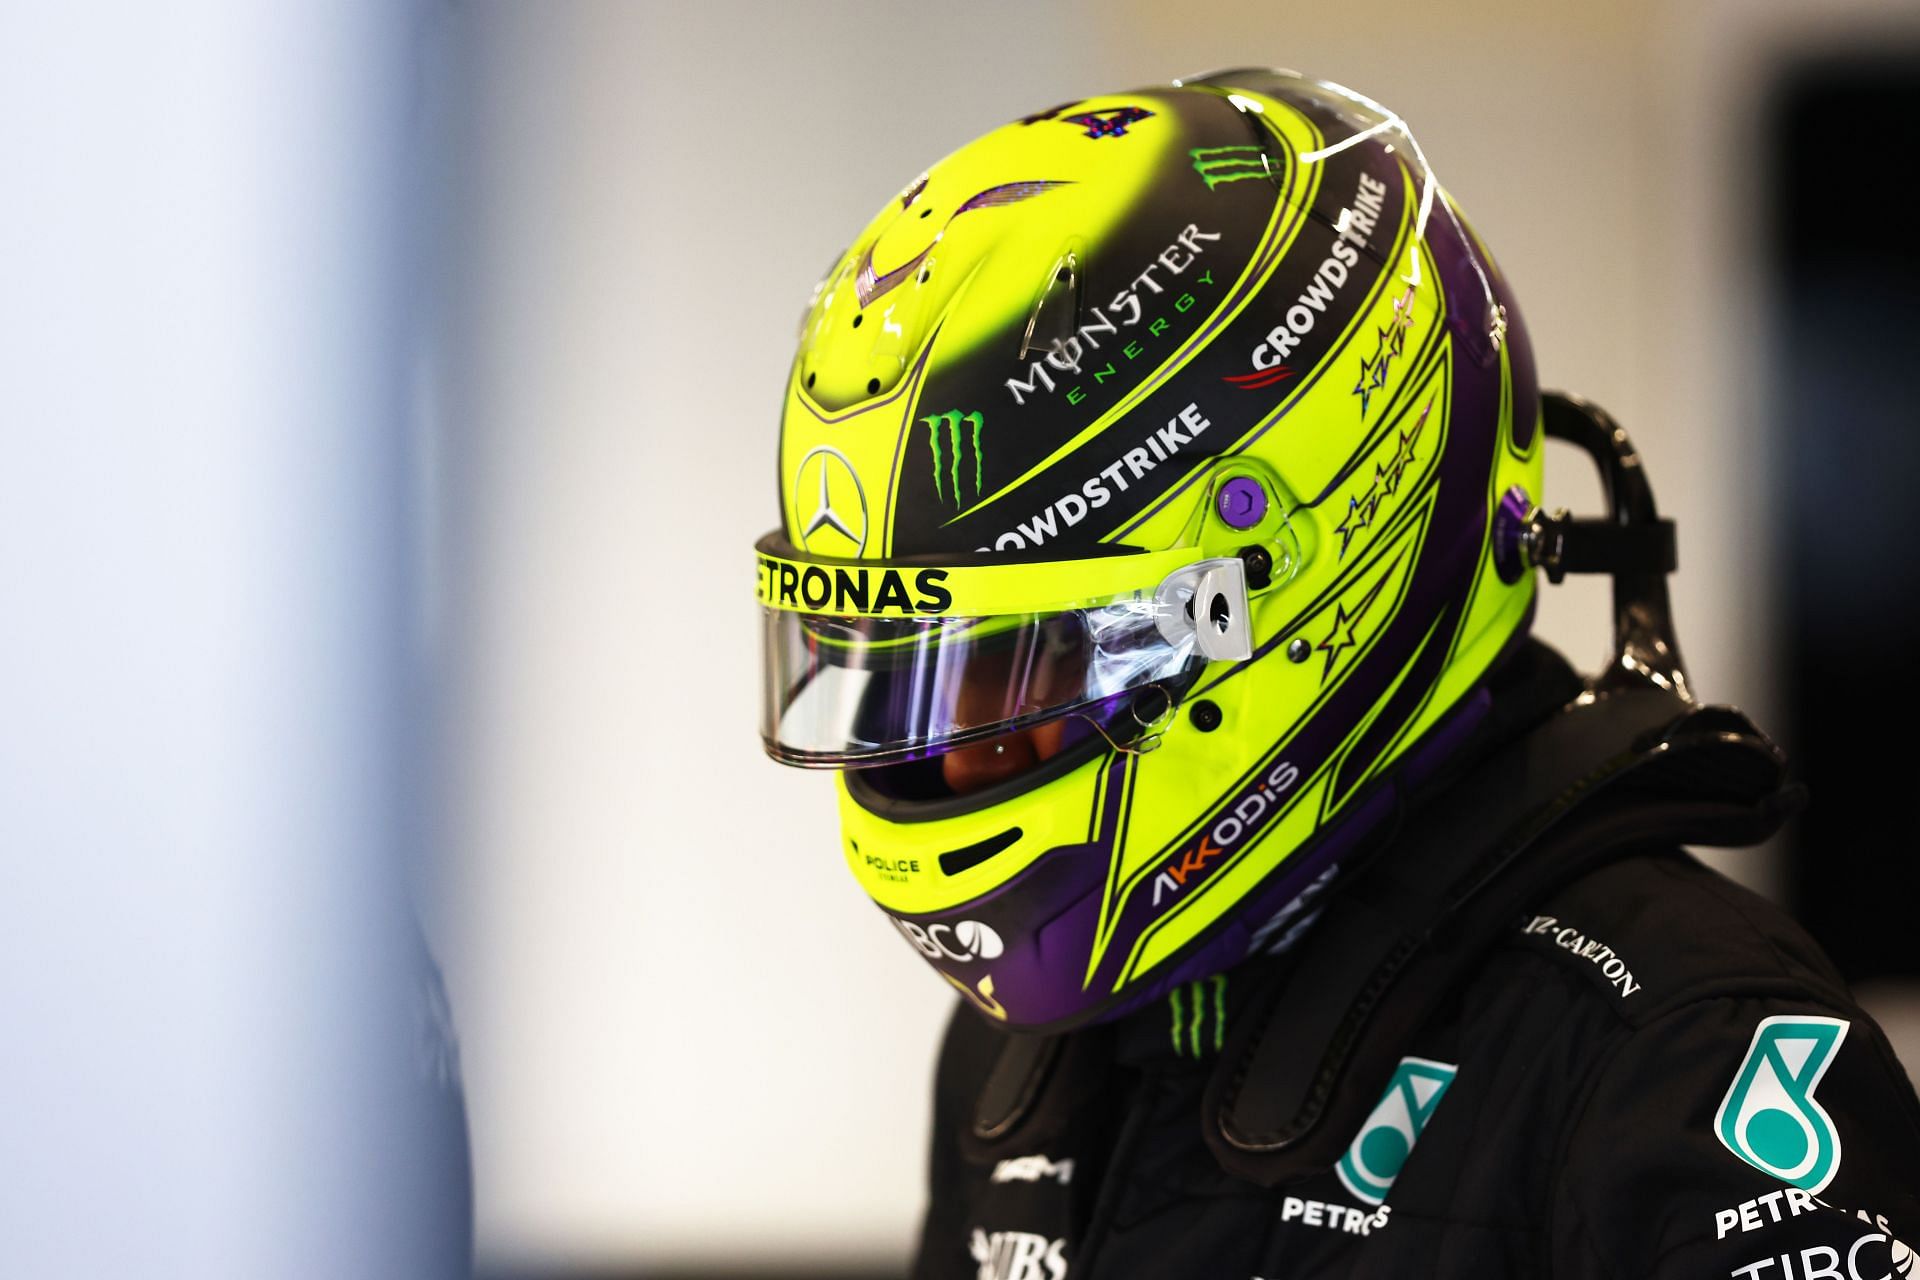 Damon Hill feels Lewis Hamilton should not be counted out of the title fight just yet